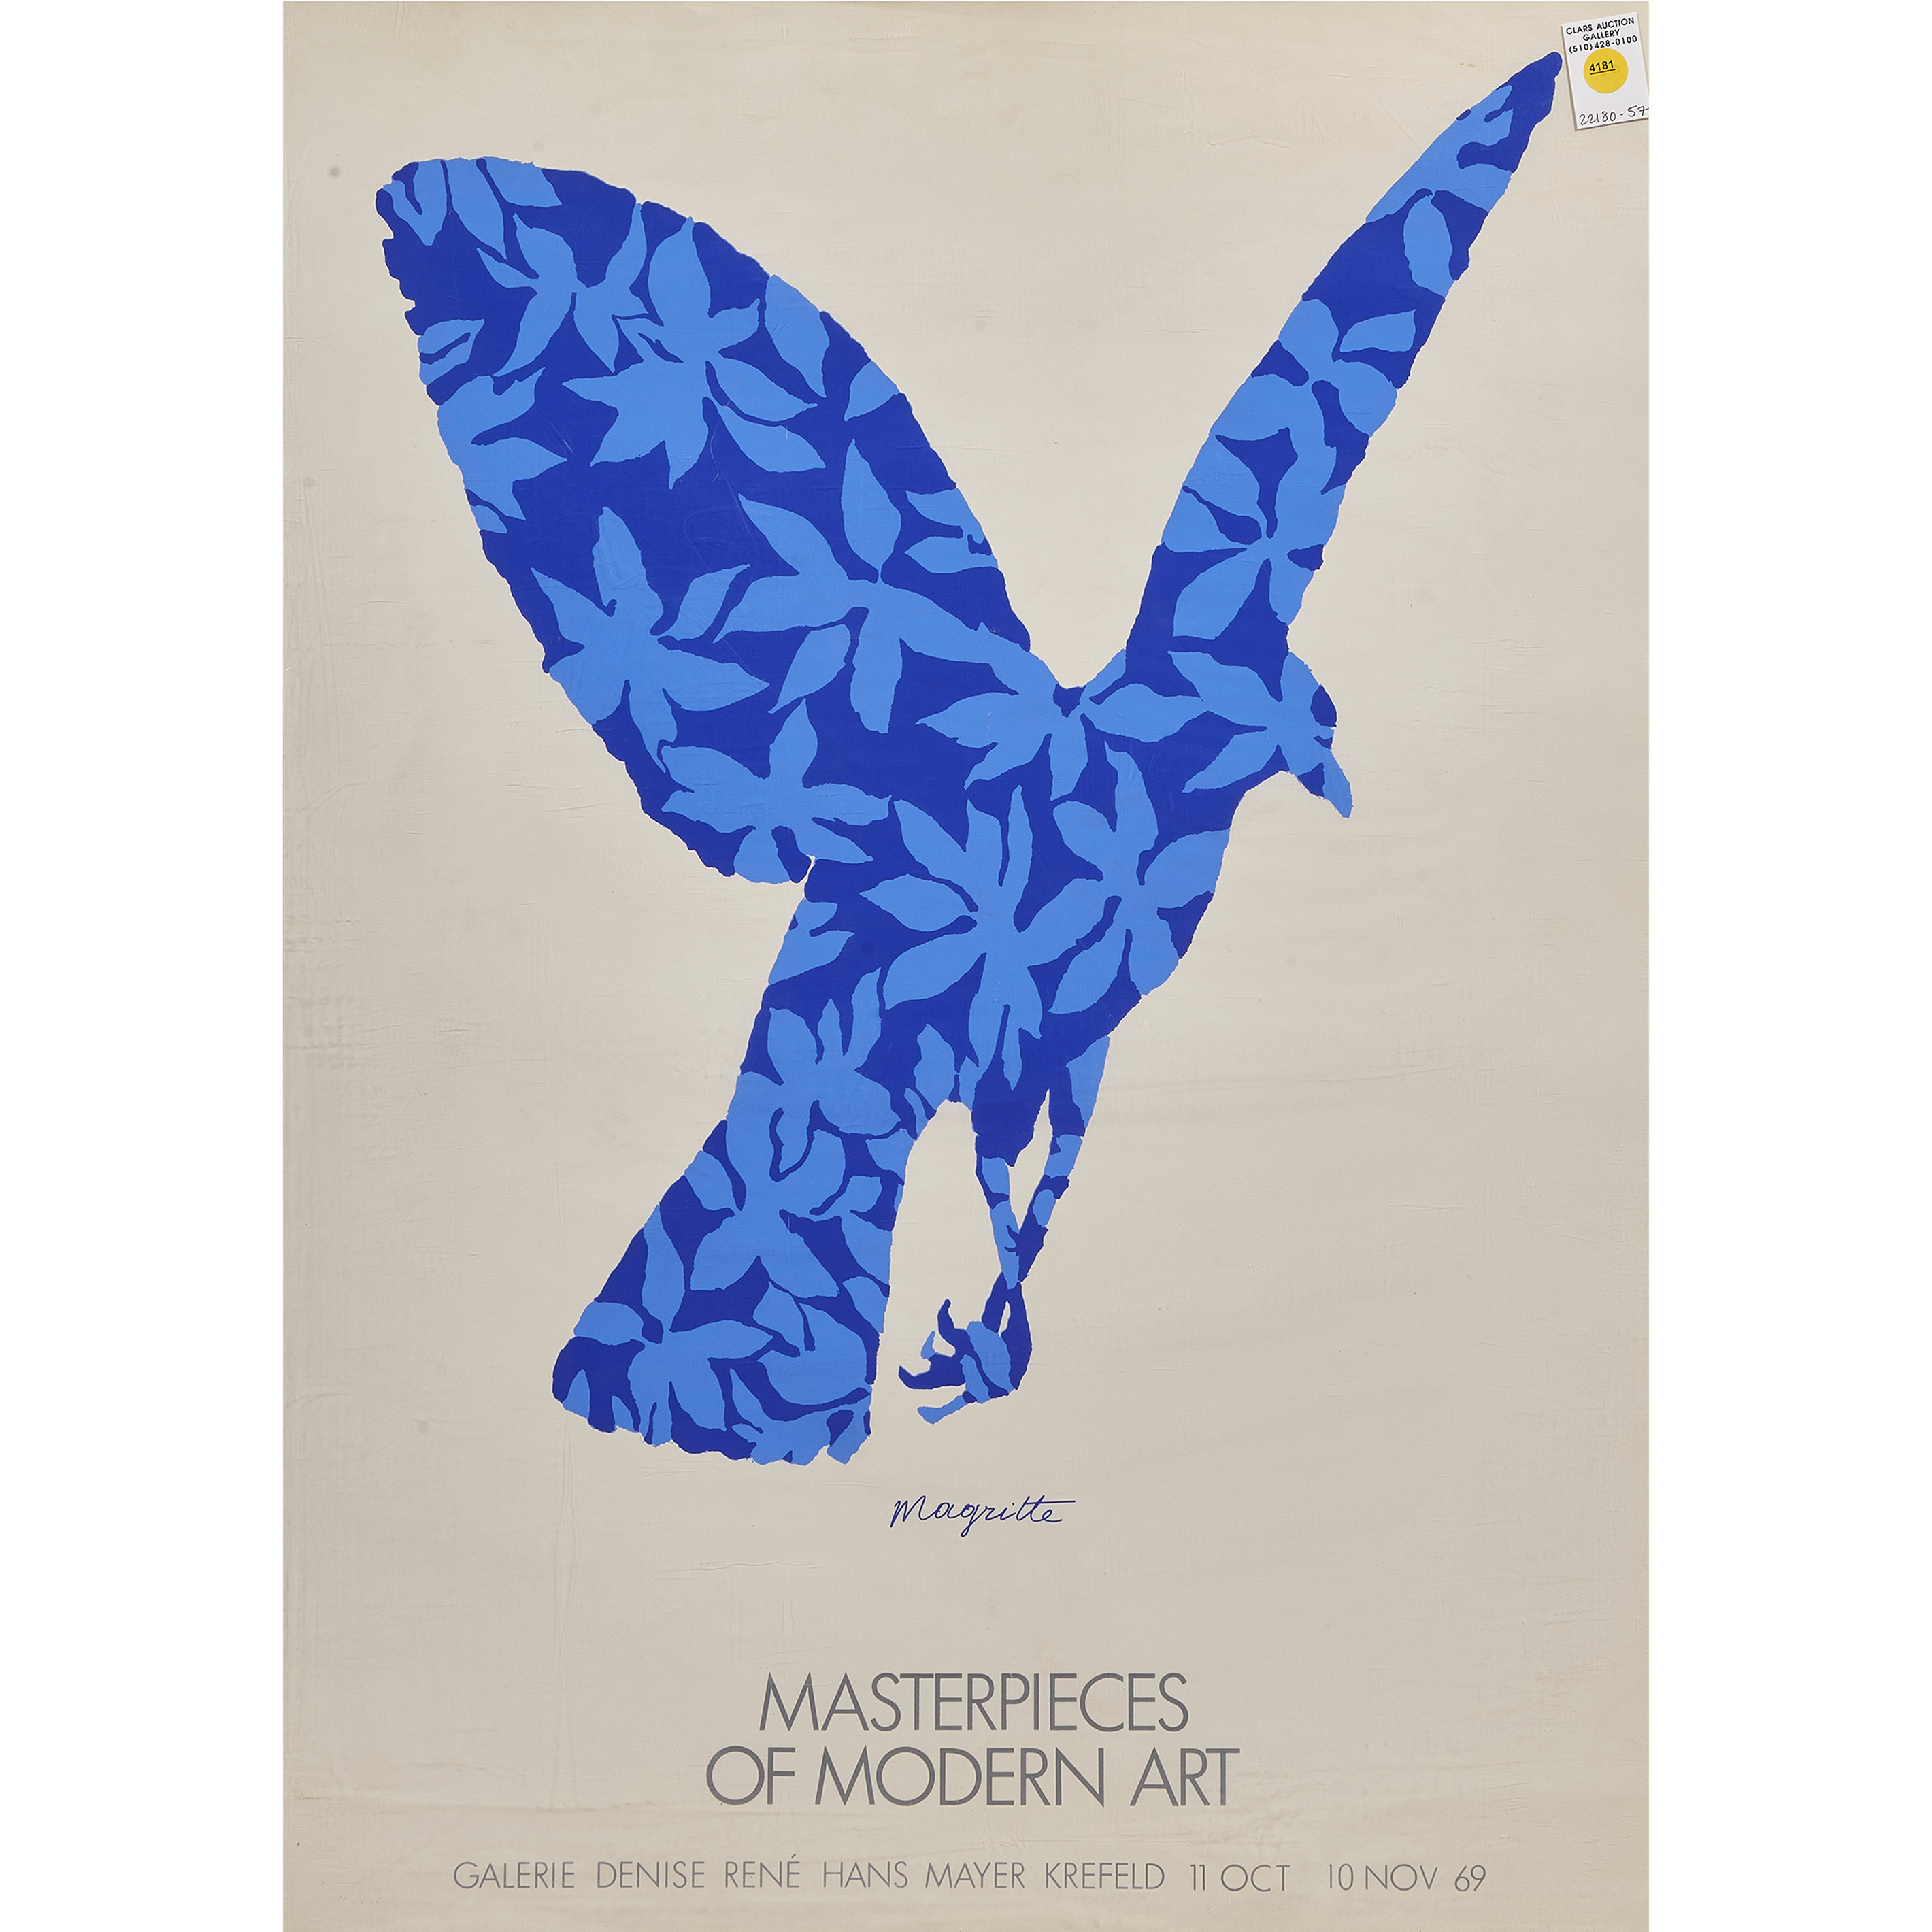 POSTER, MAGRITTE, MASTERPIECES OF MODERN